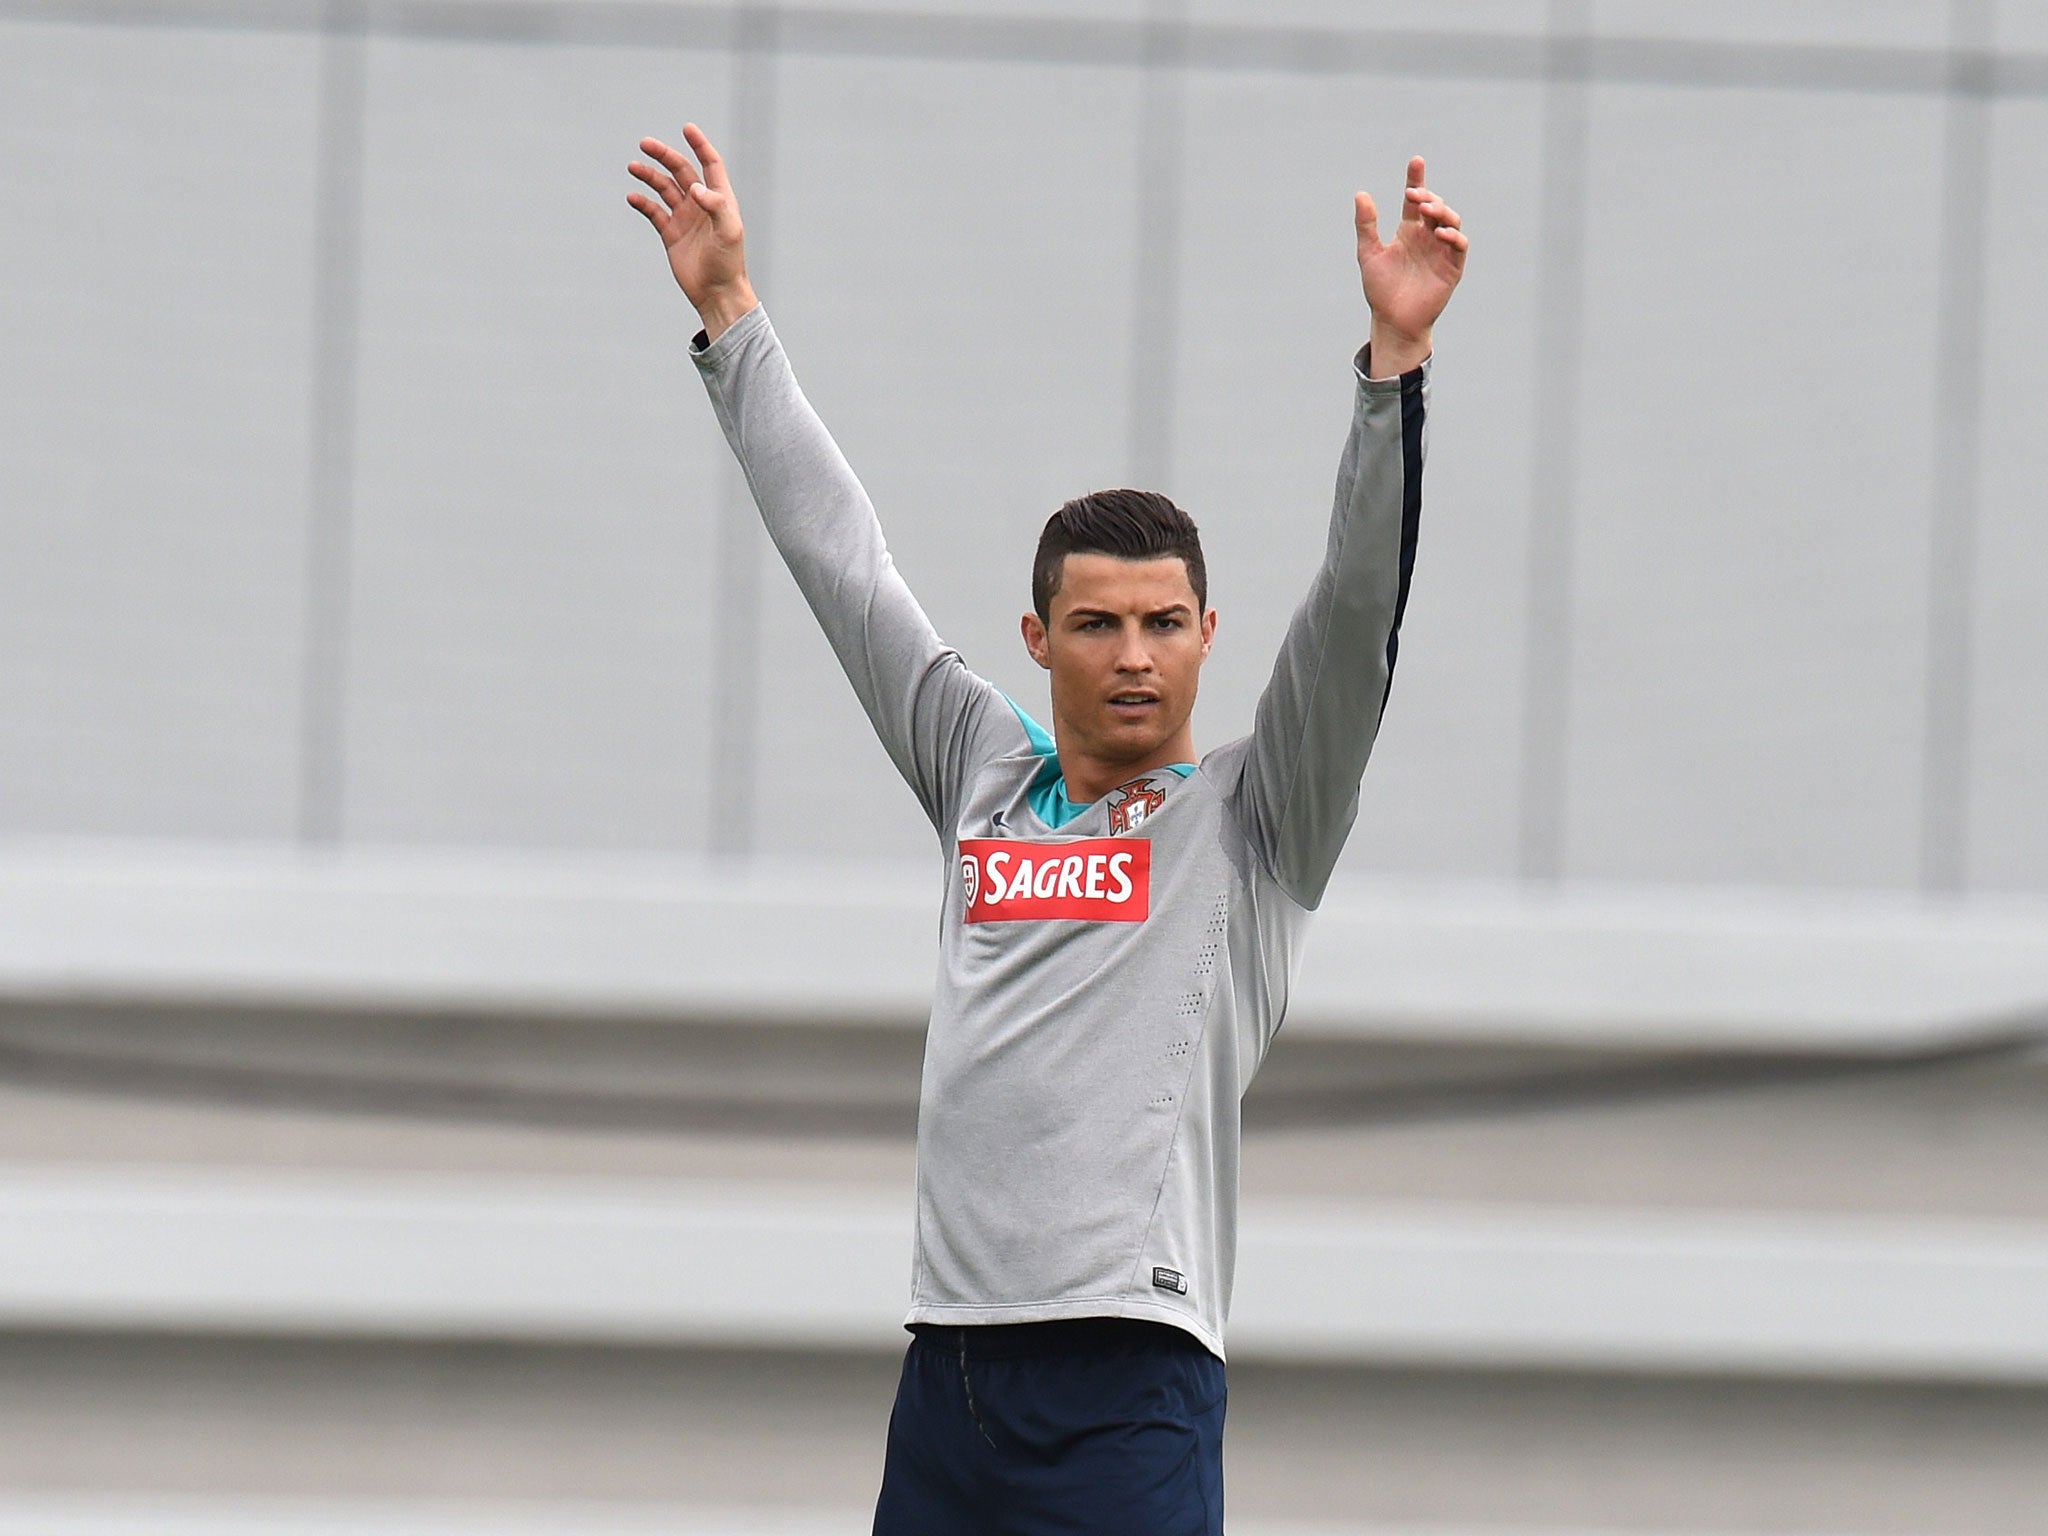 Cristiano Ronaldo has returned to training for Portugal ahead of the World Cup